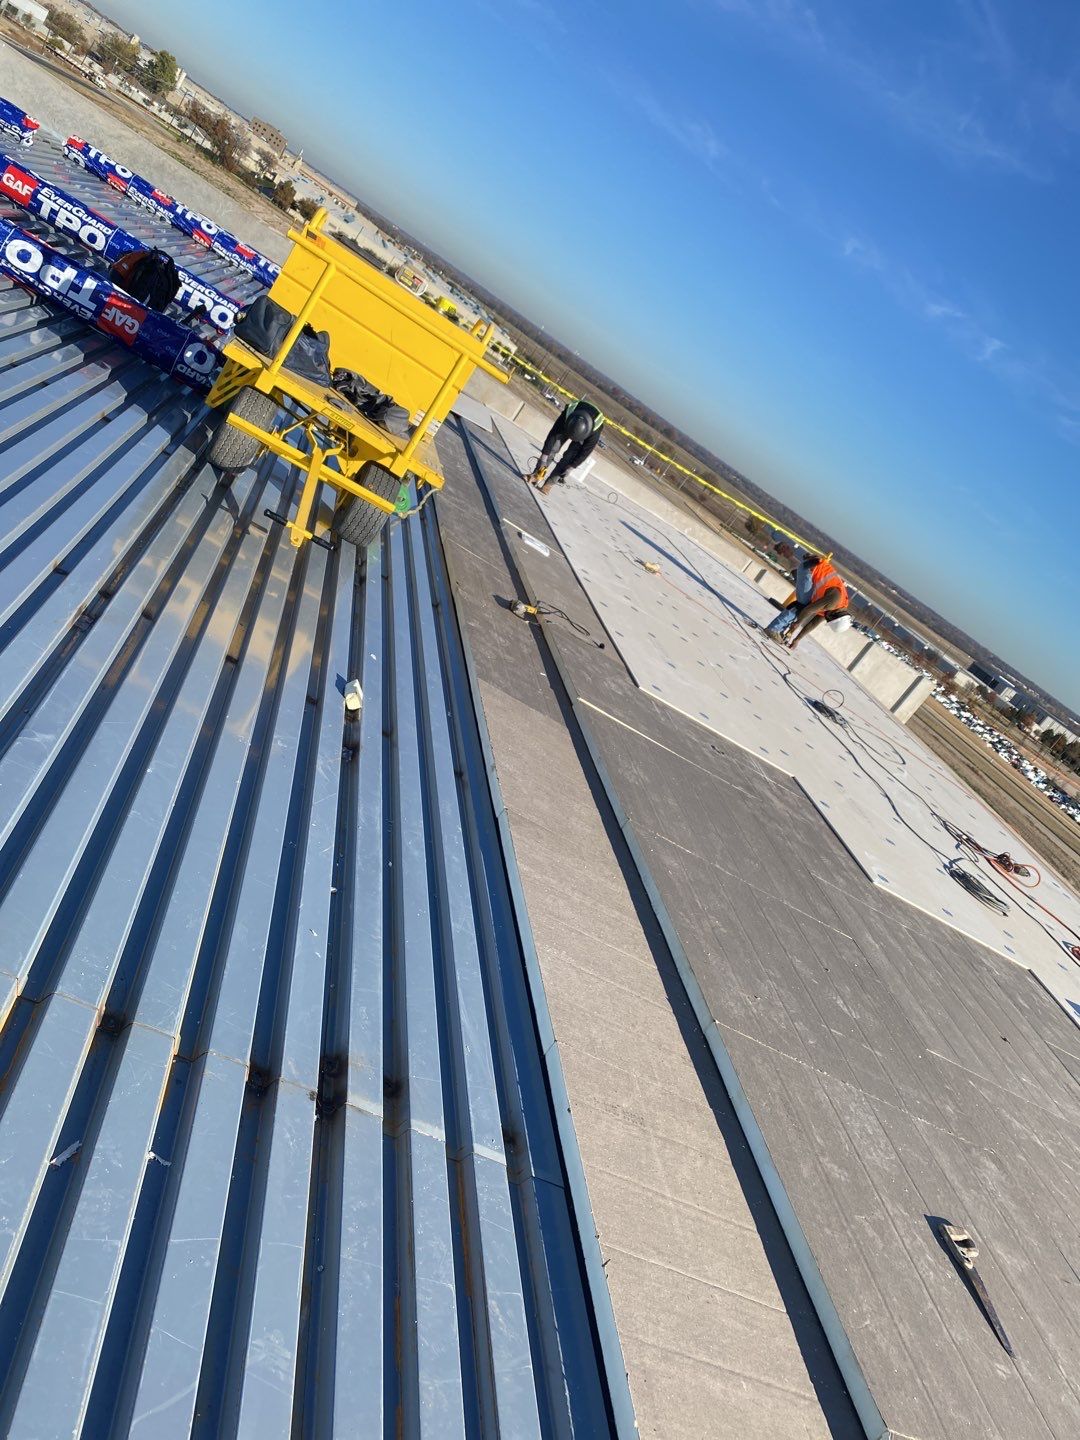 Bass Roofing's commercial roofing services in Fort Worth